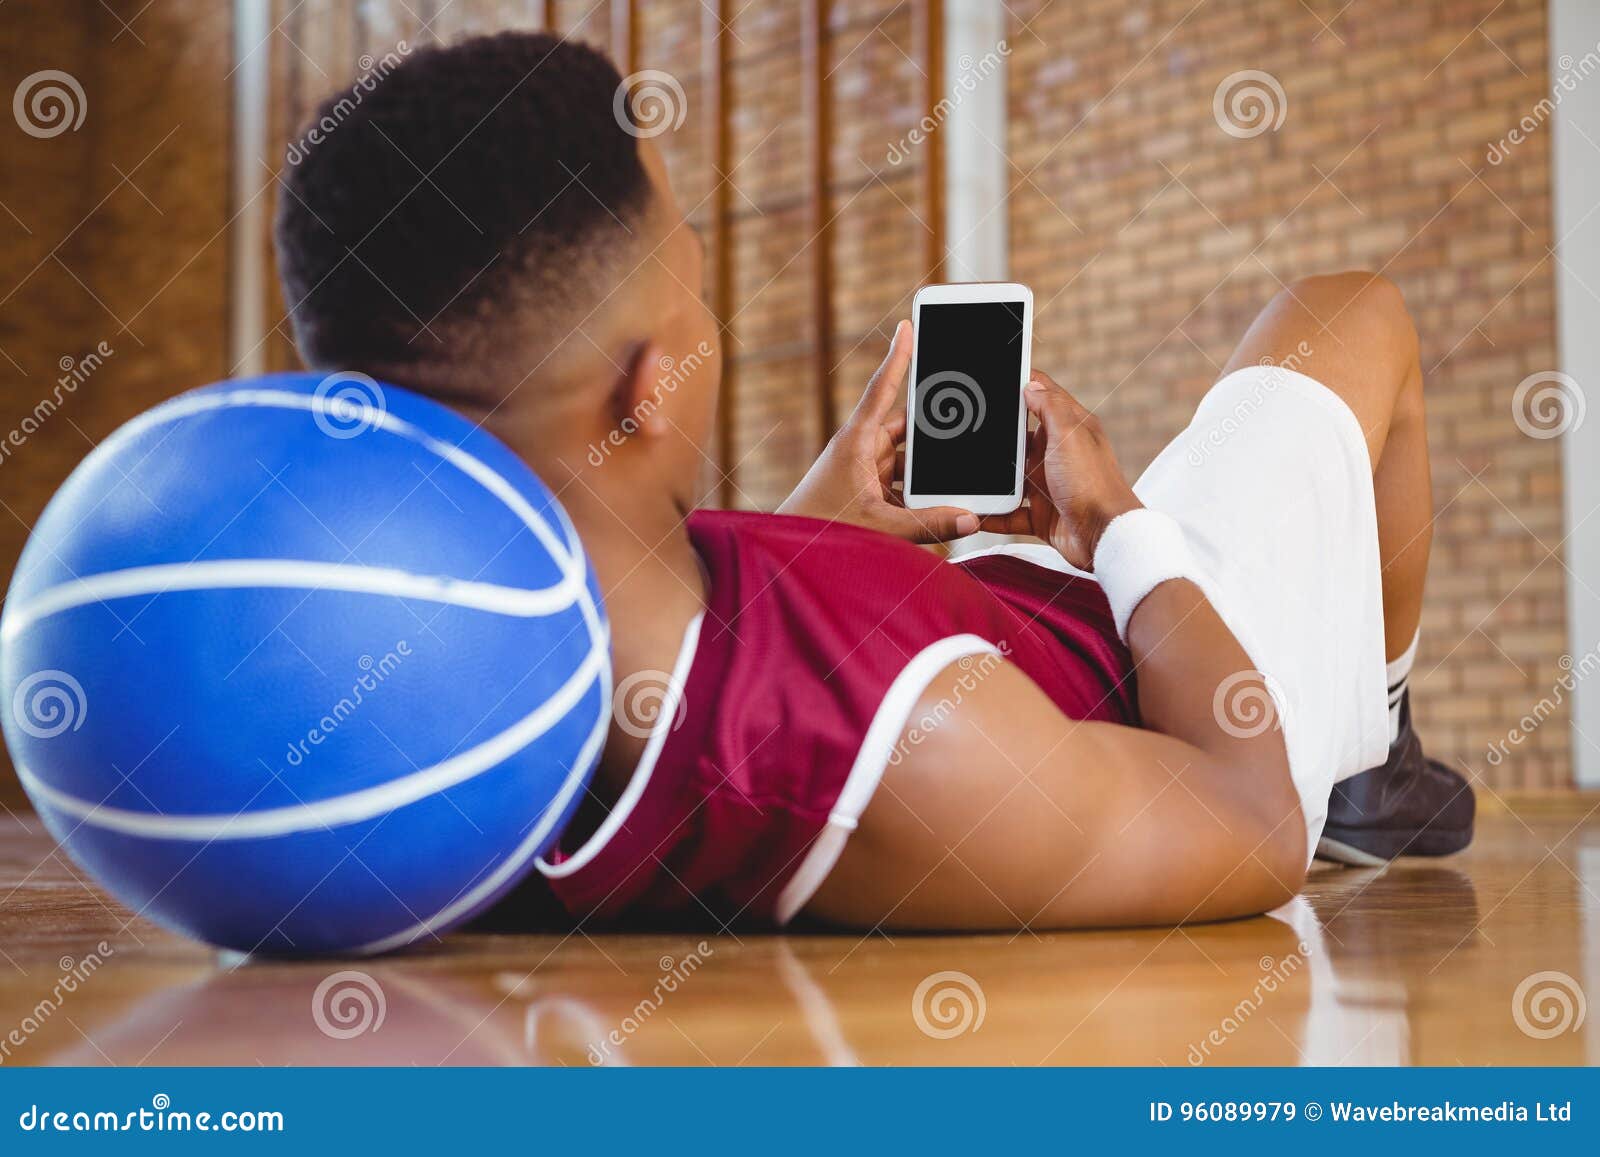 close-up-male-basketball-player-using-mobile-phone-reclining-floor-court-96089979.jpg